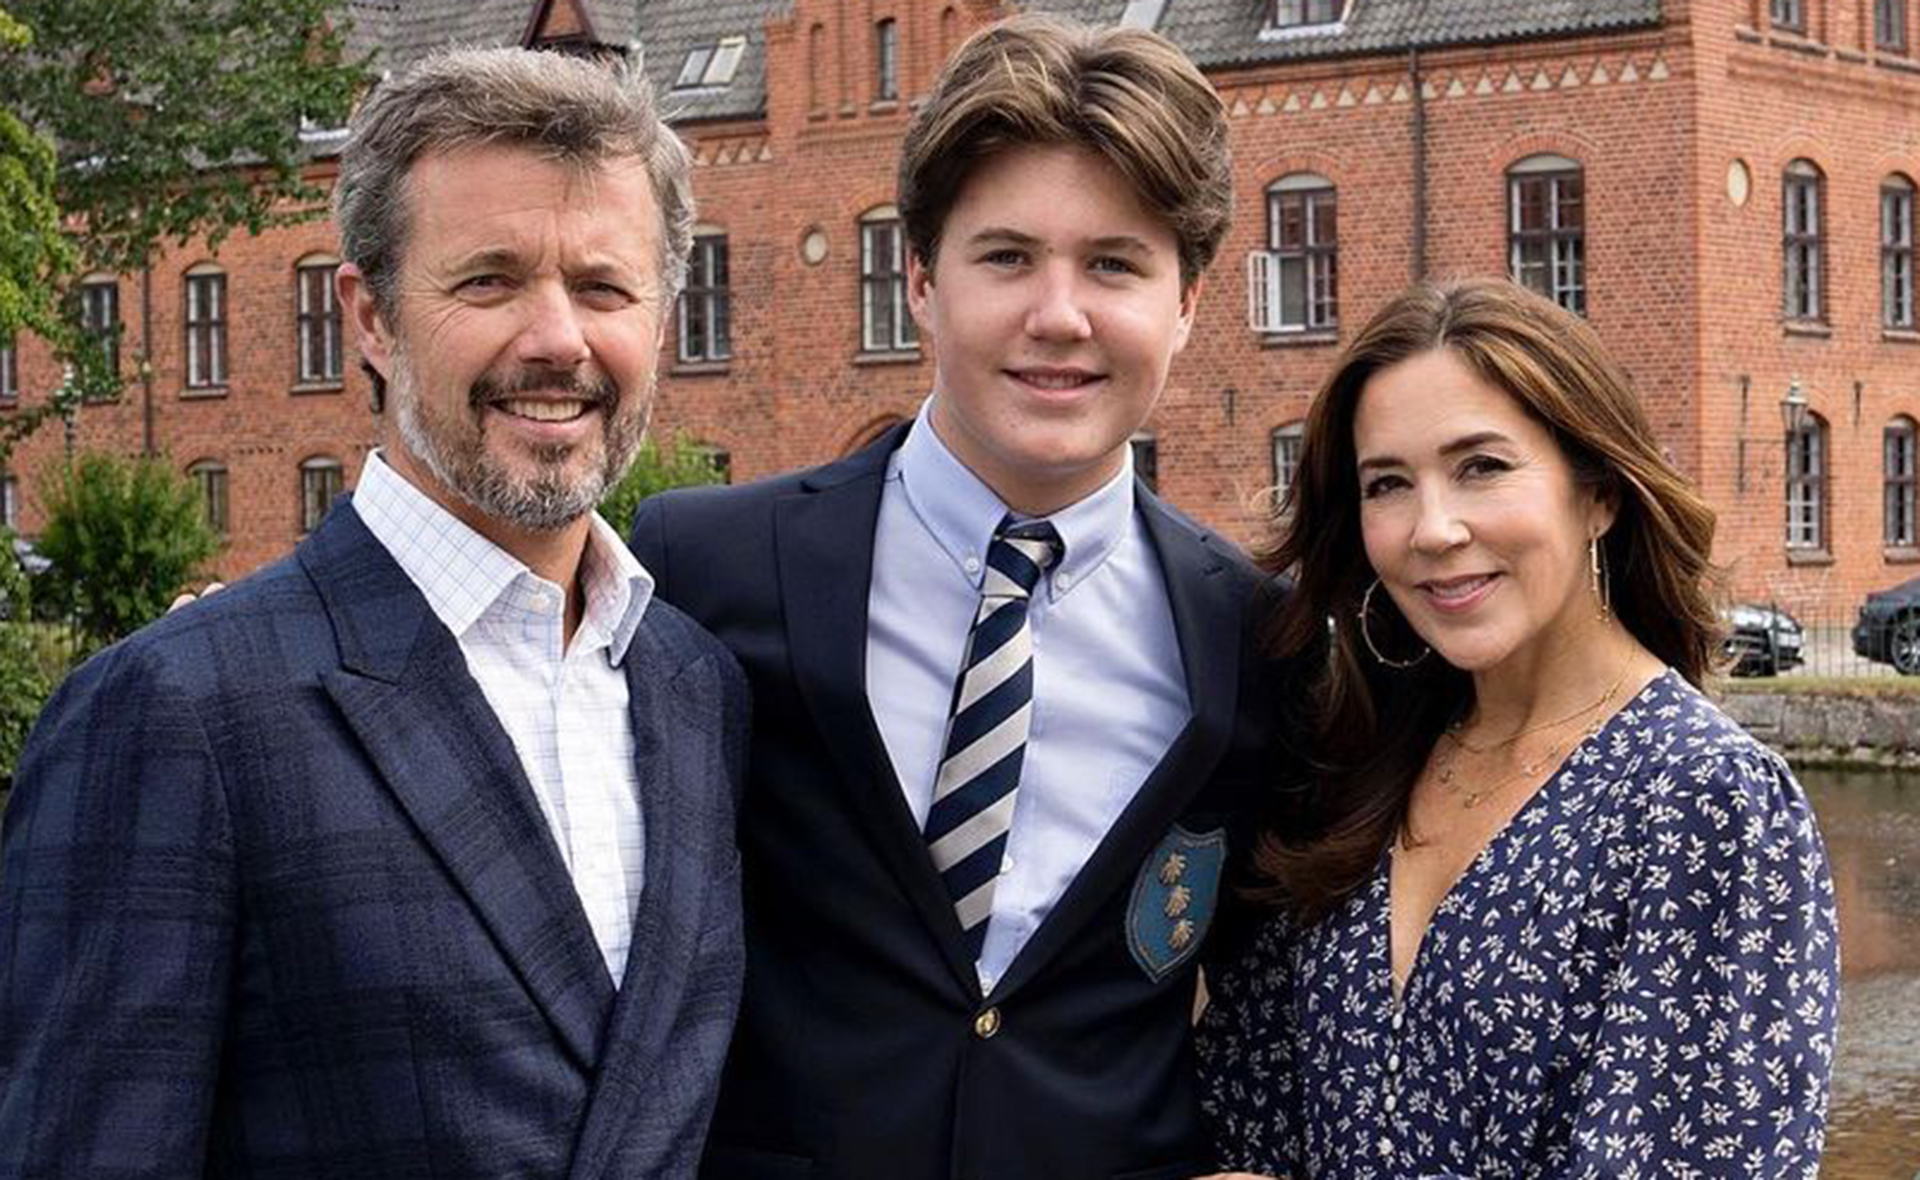 Princess Mary and Prince Frederik beam as their son Prince Christian heads off to boarding school in new portraits